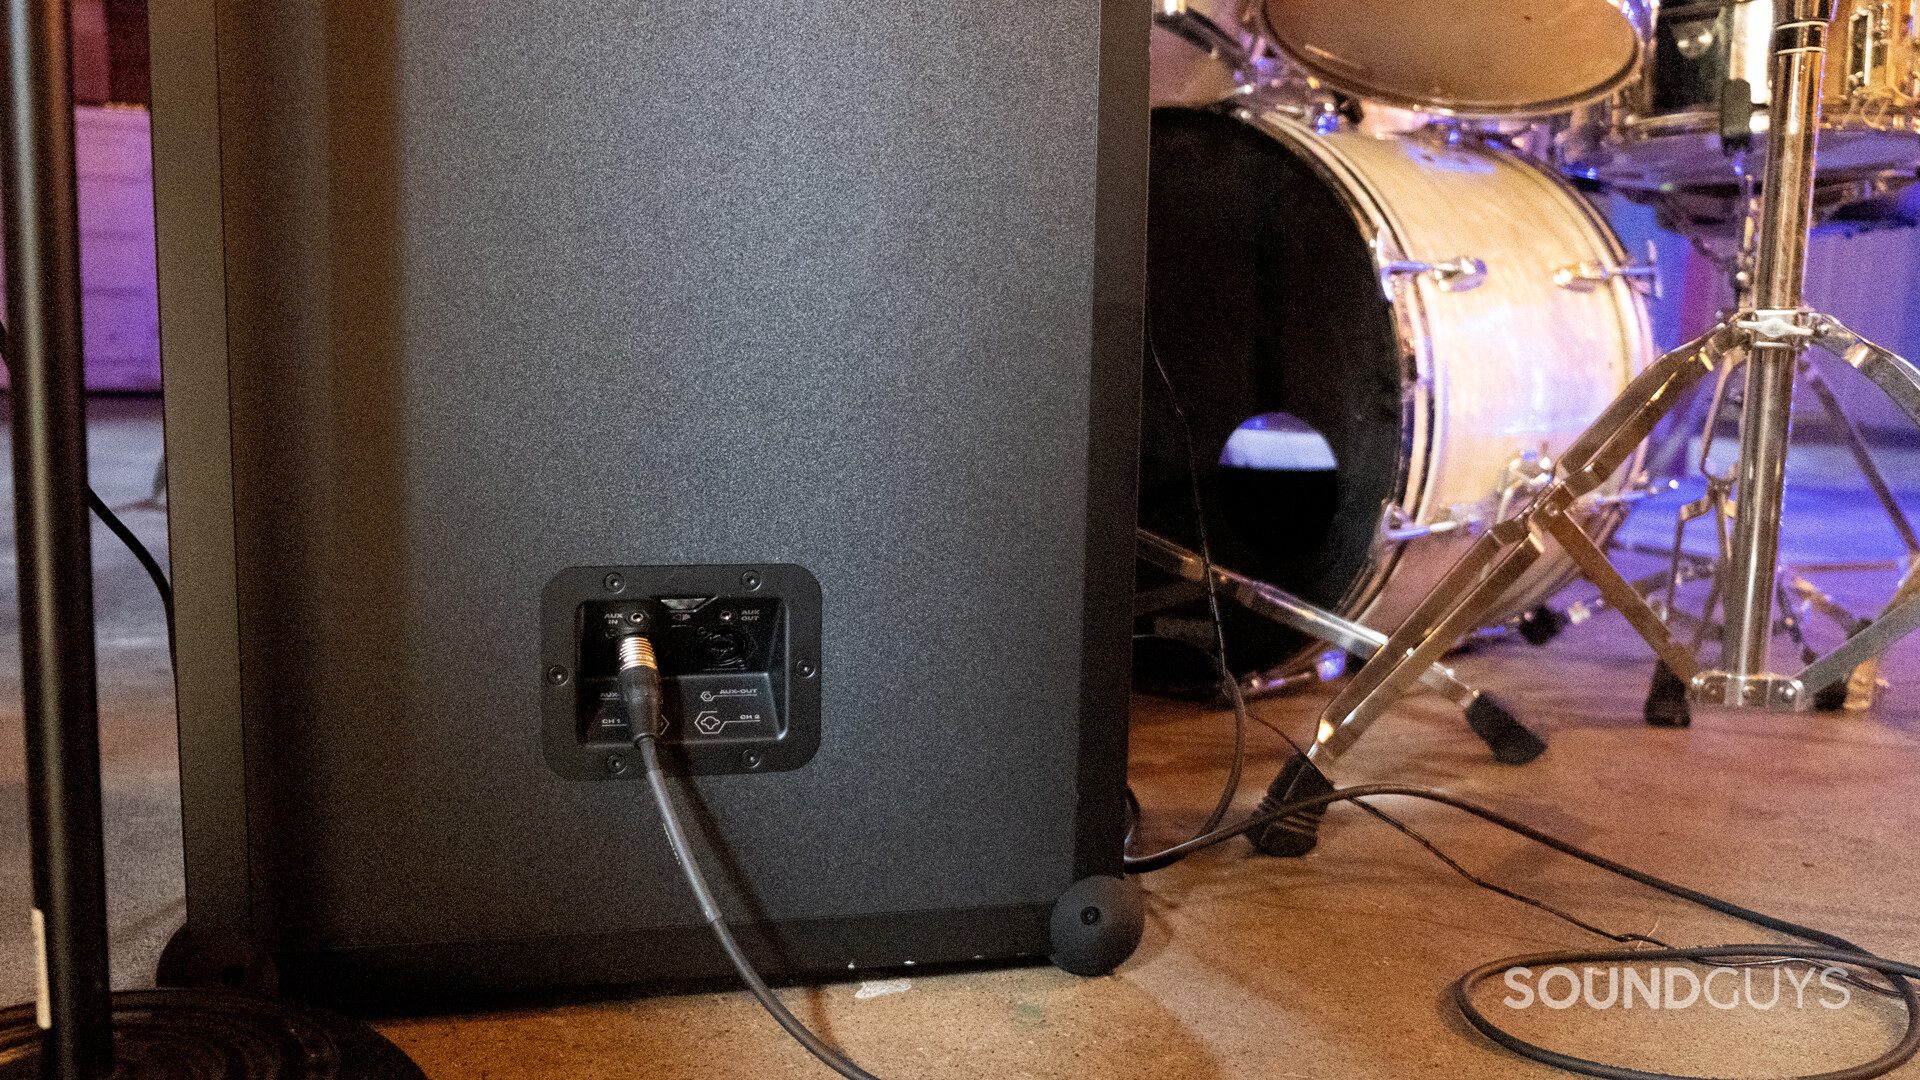 Back of SoundBoks Gen. 3) with an XLR cable plugged in and a drum kit in the background.